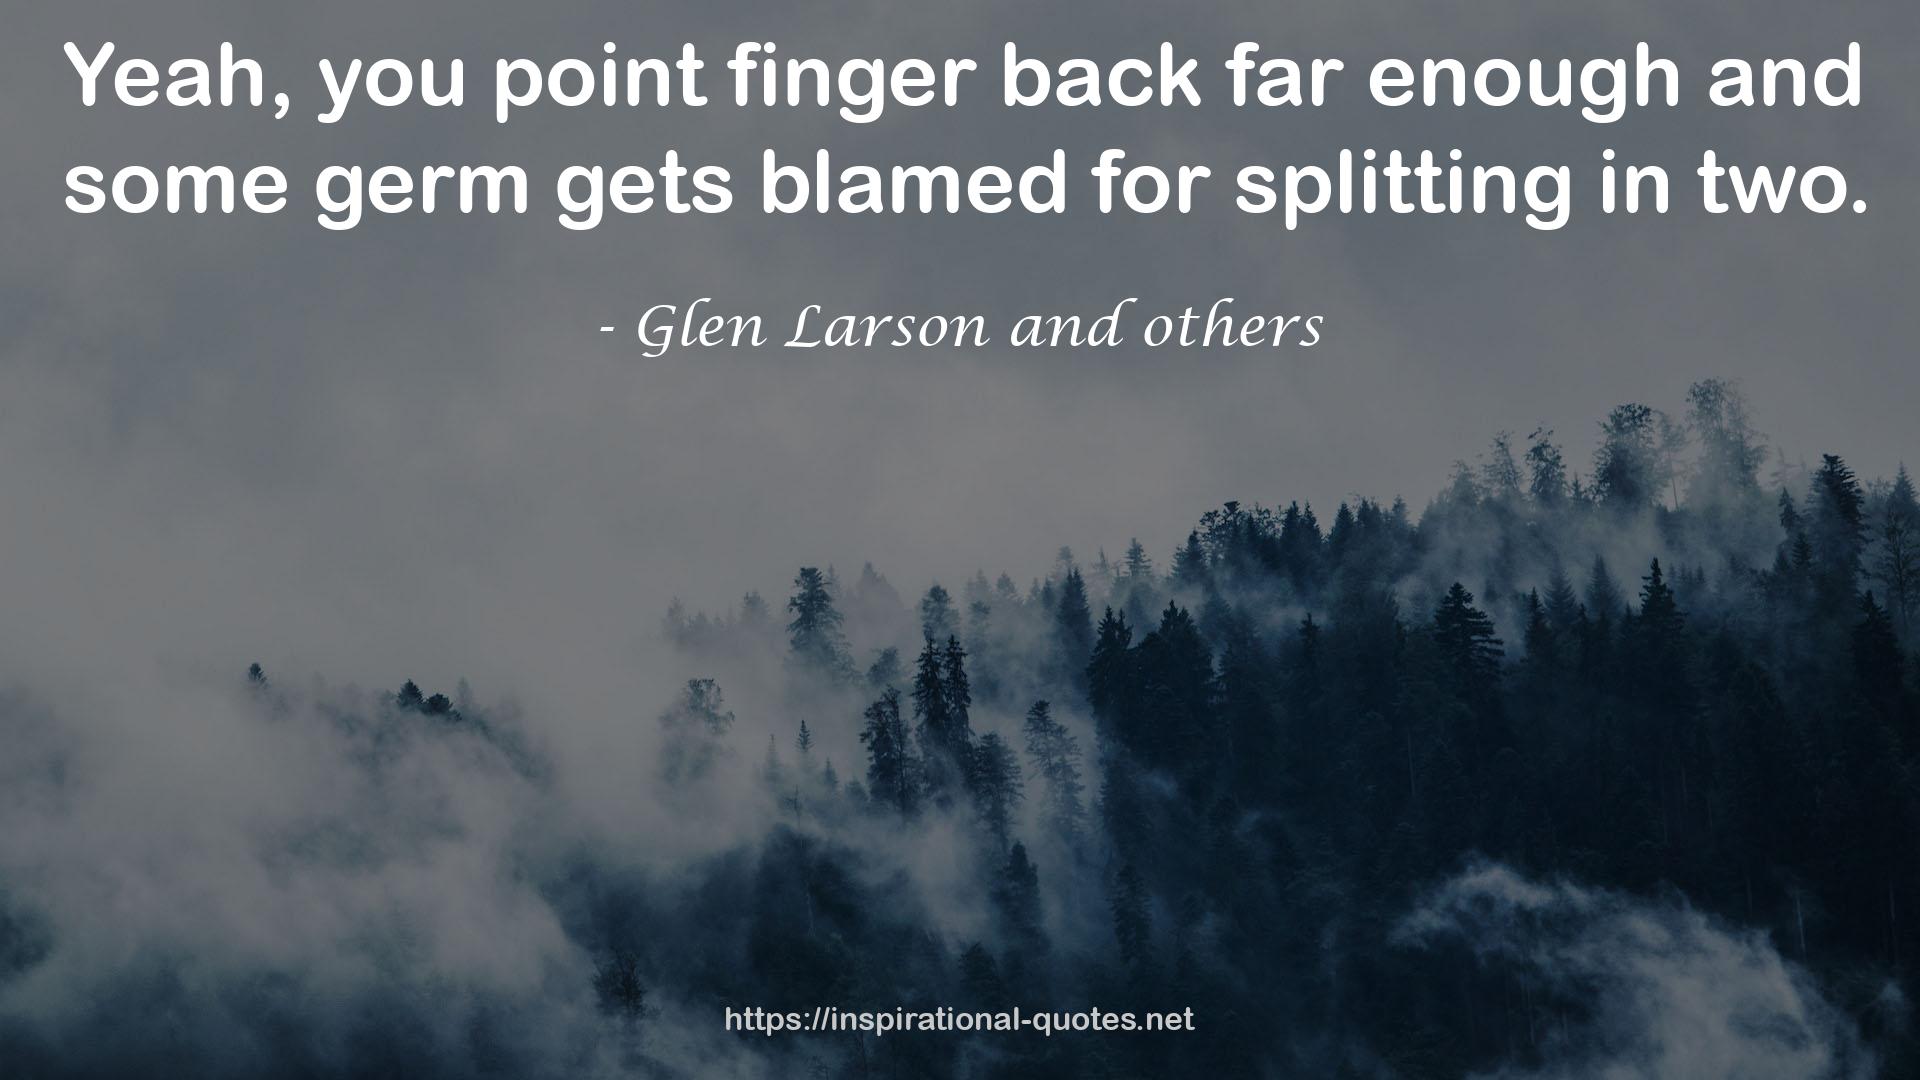 Glen Larson and others QUOTES